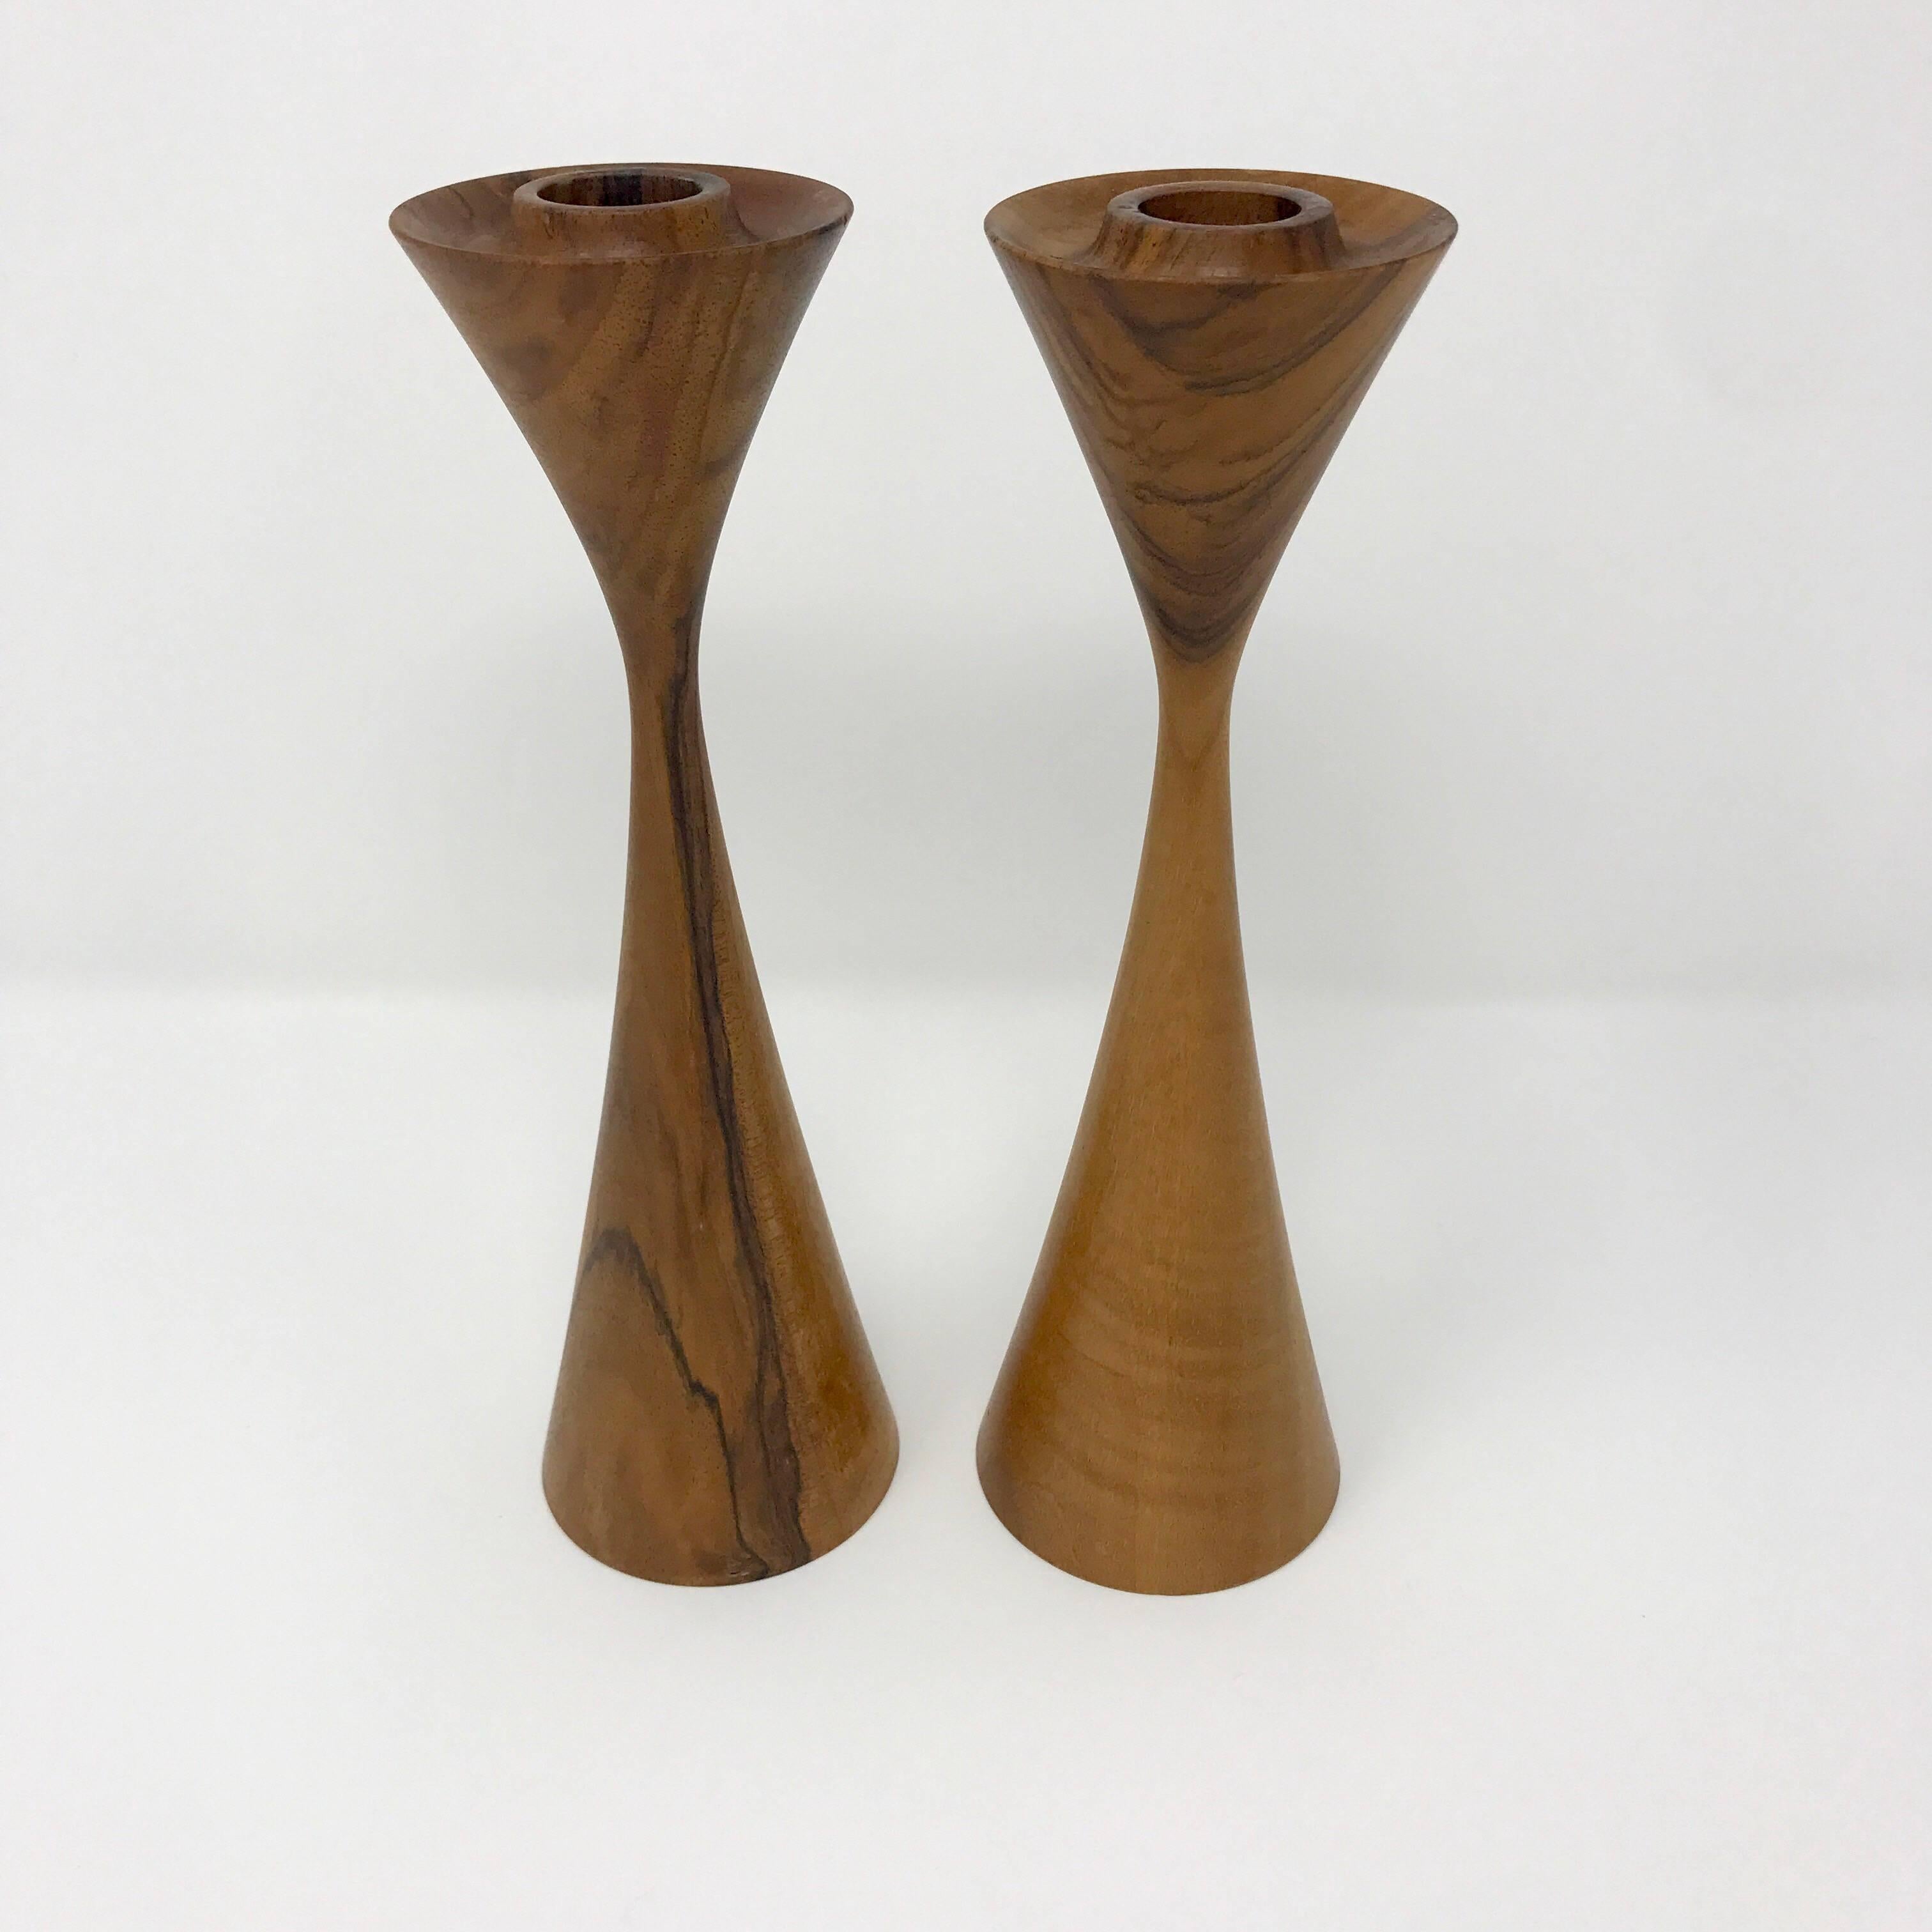 Pair of 1960s turned wooden candlesticks by Lanny Lyell. Each candlestick is signed 